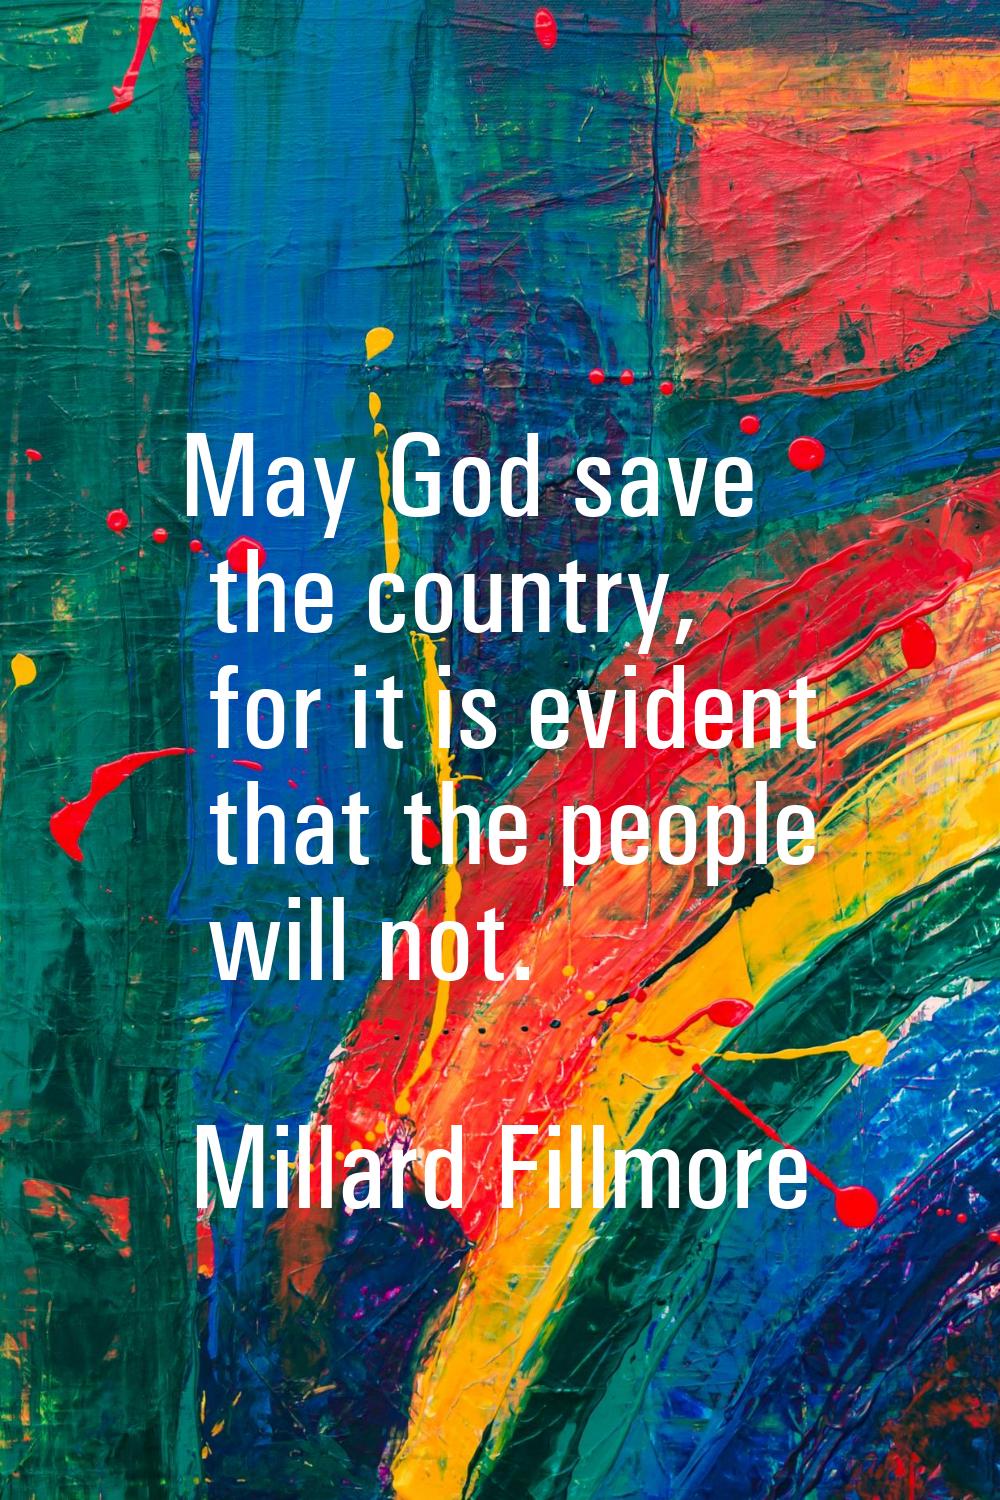 May God save the country, for it is evident that the people will not.